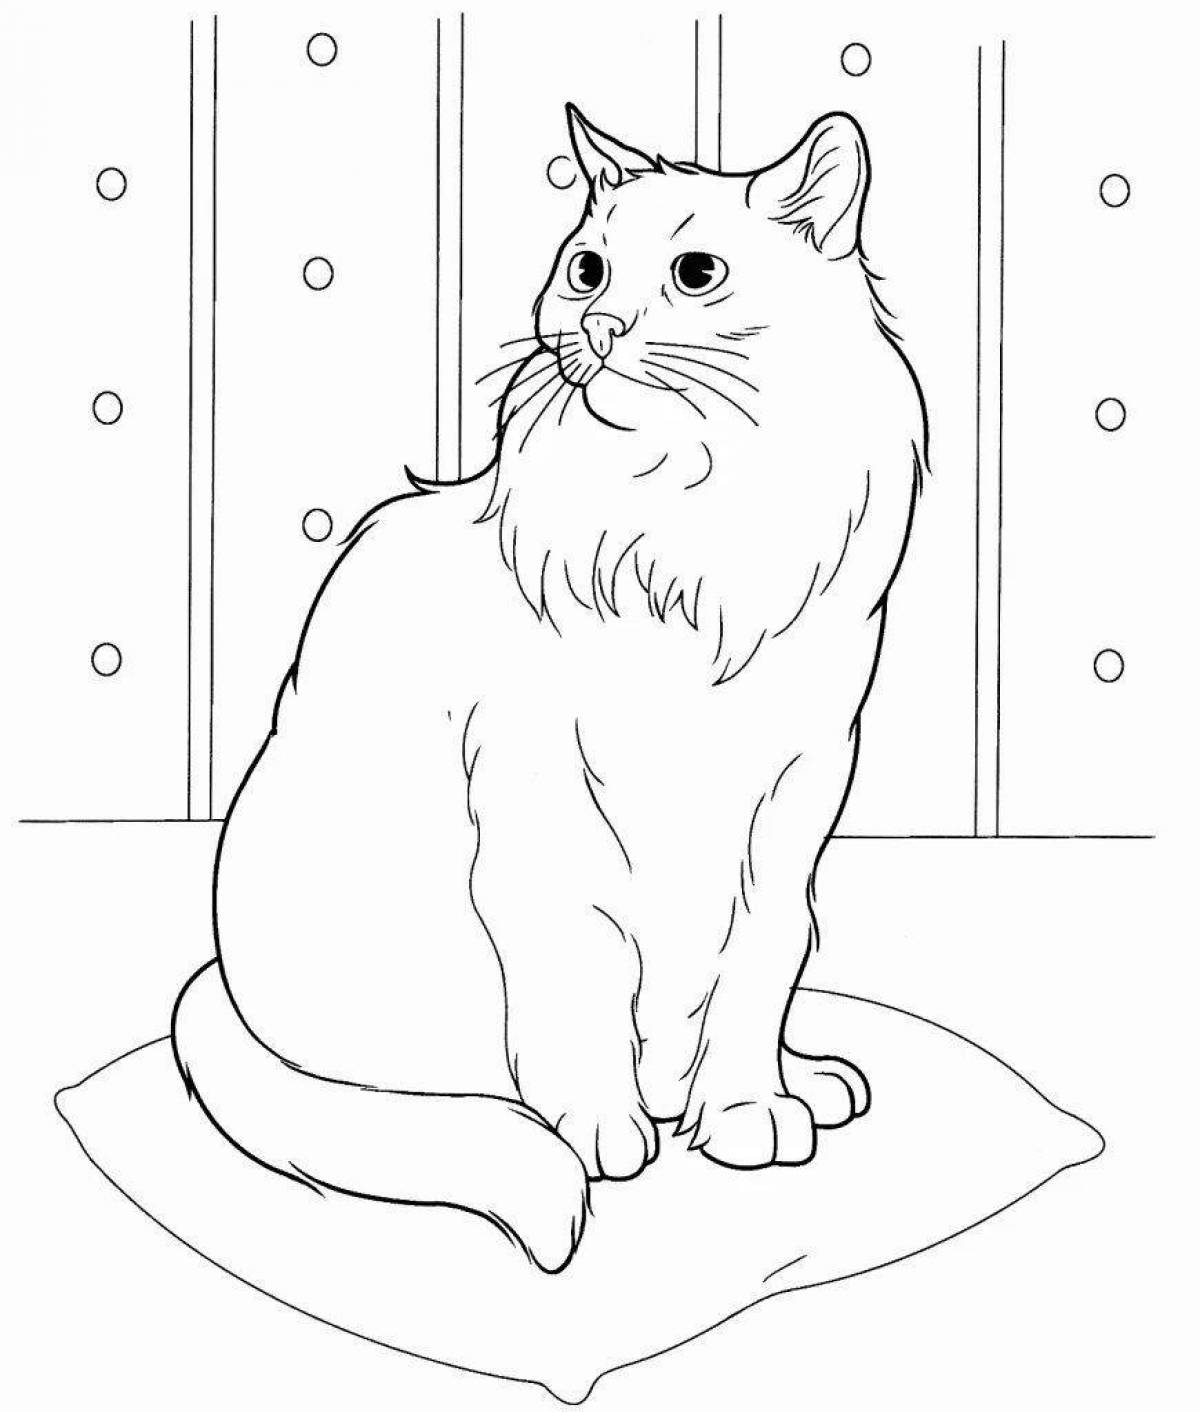 Coloring page charming red cat